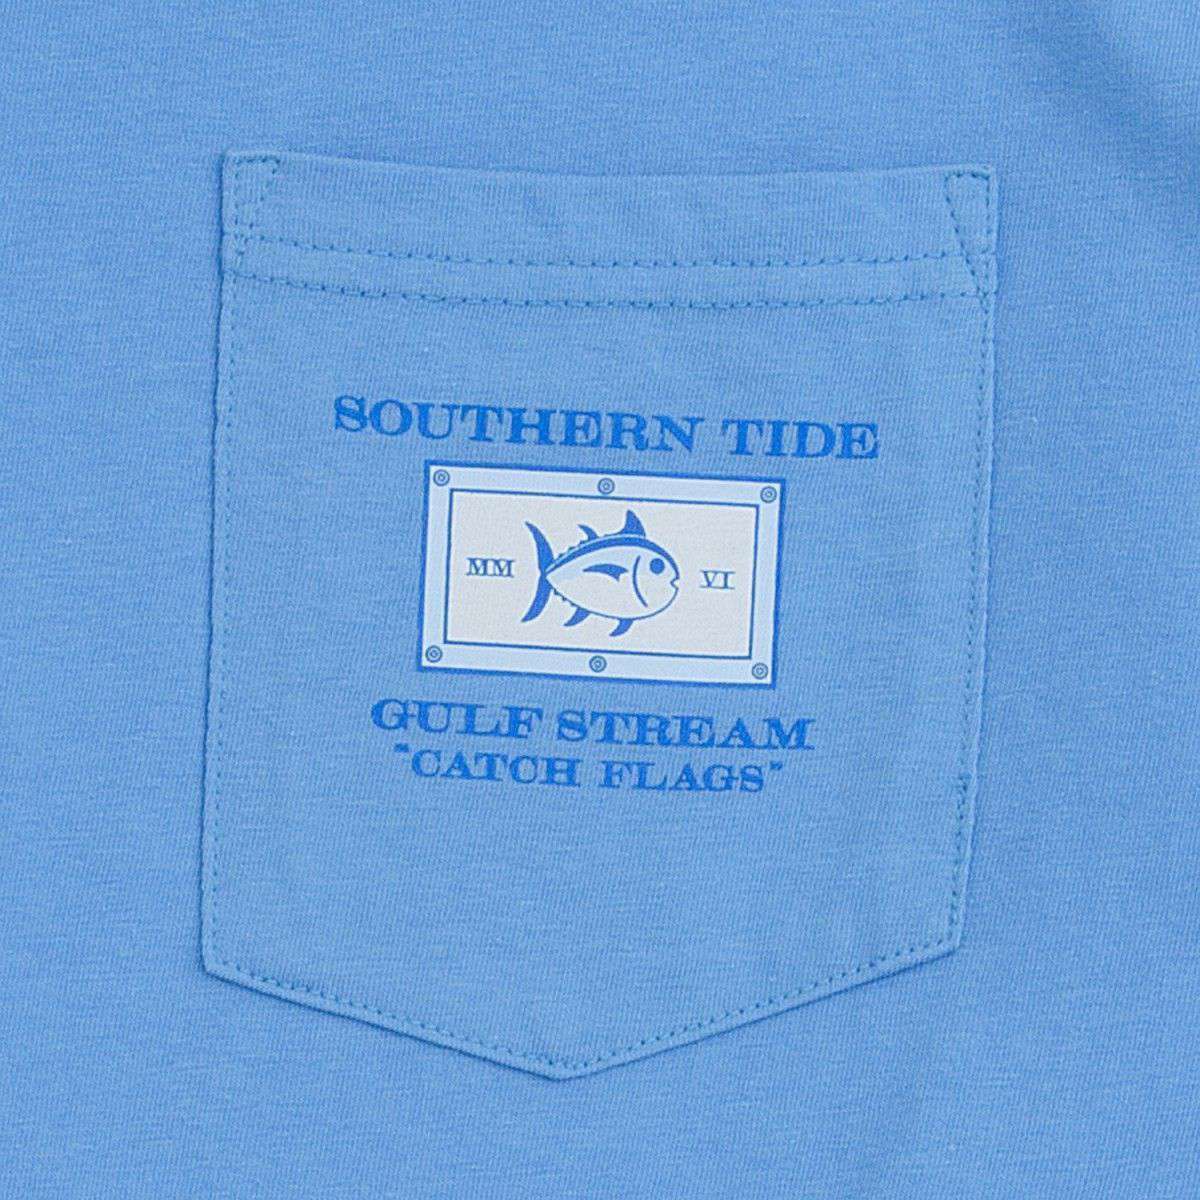 Catch Flags II Tee-Shirt in Cool Water Blue by Southern Tide - Country Club Prep